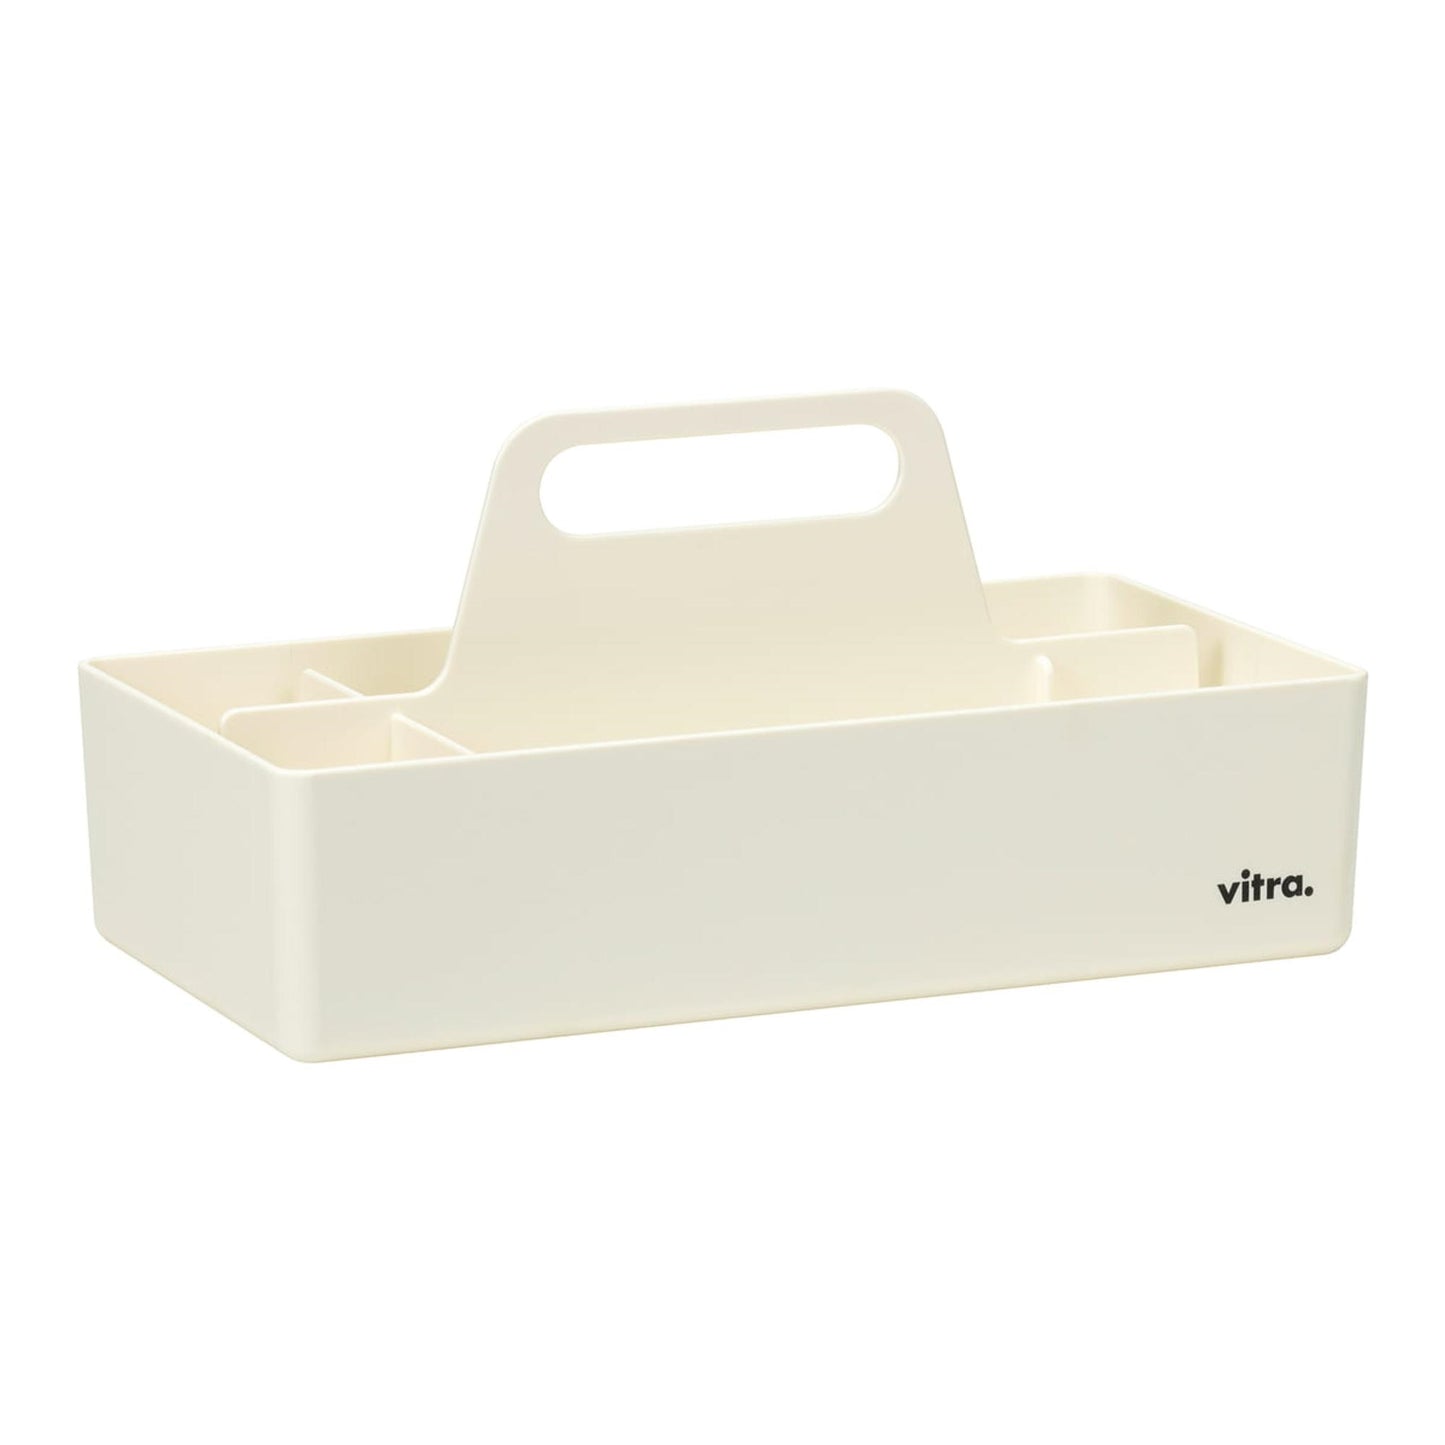 RE Toolbox by Vitra #White